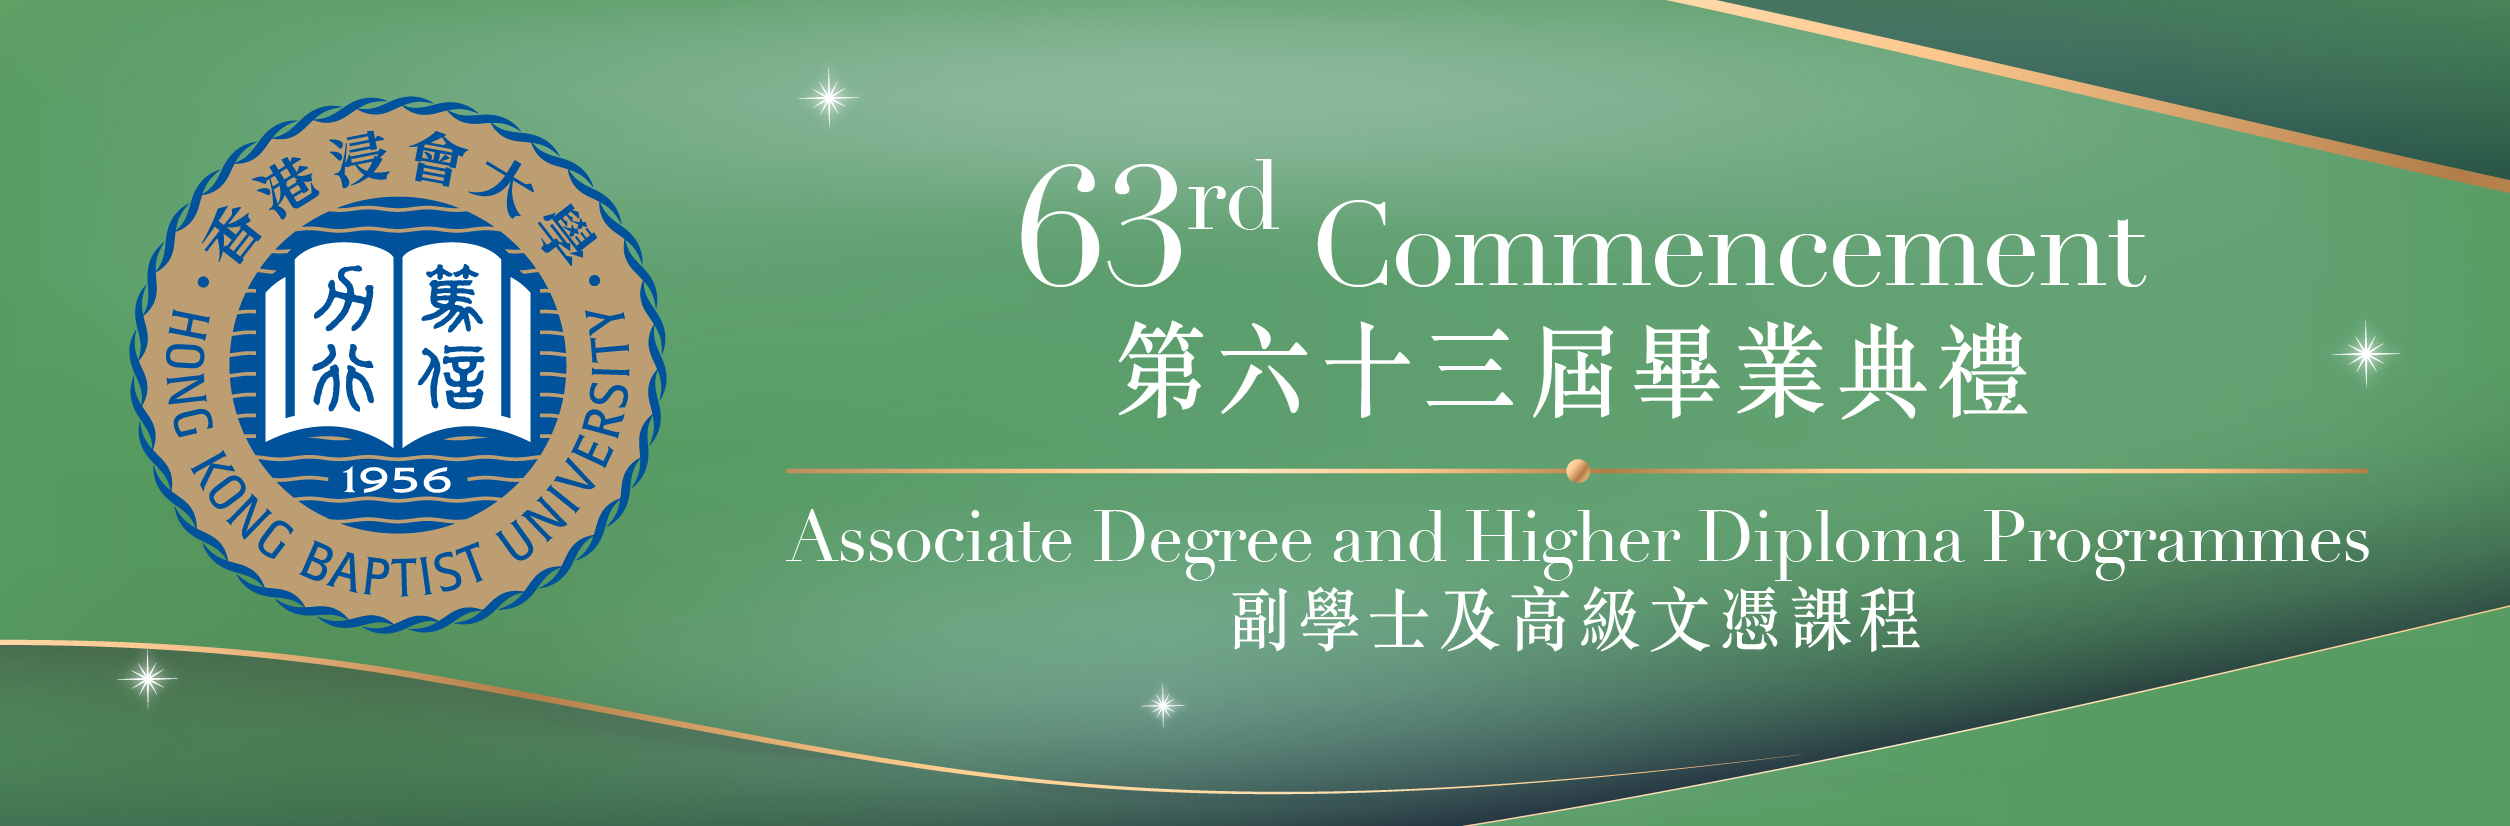 HKBU 62nd Commencement – Associate Degree and Higher Diploma Programmes